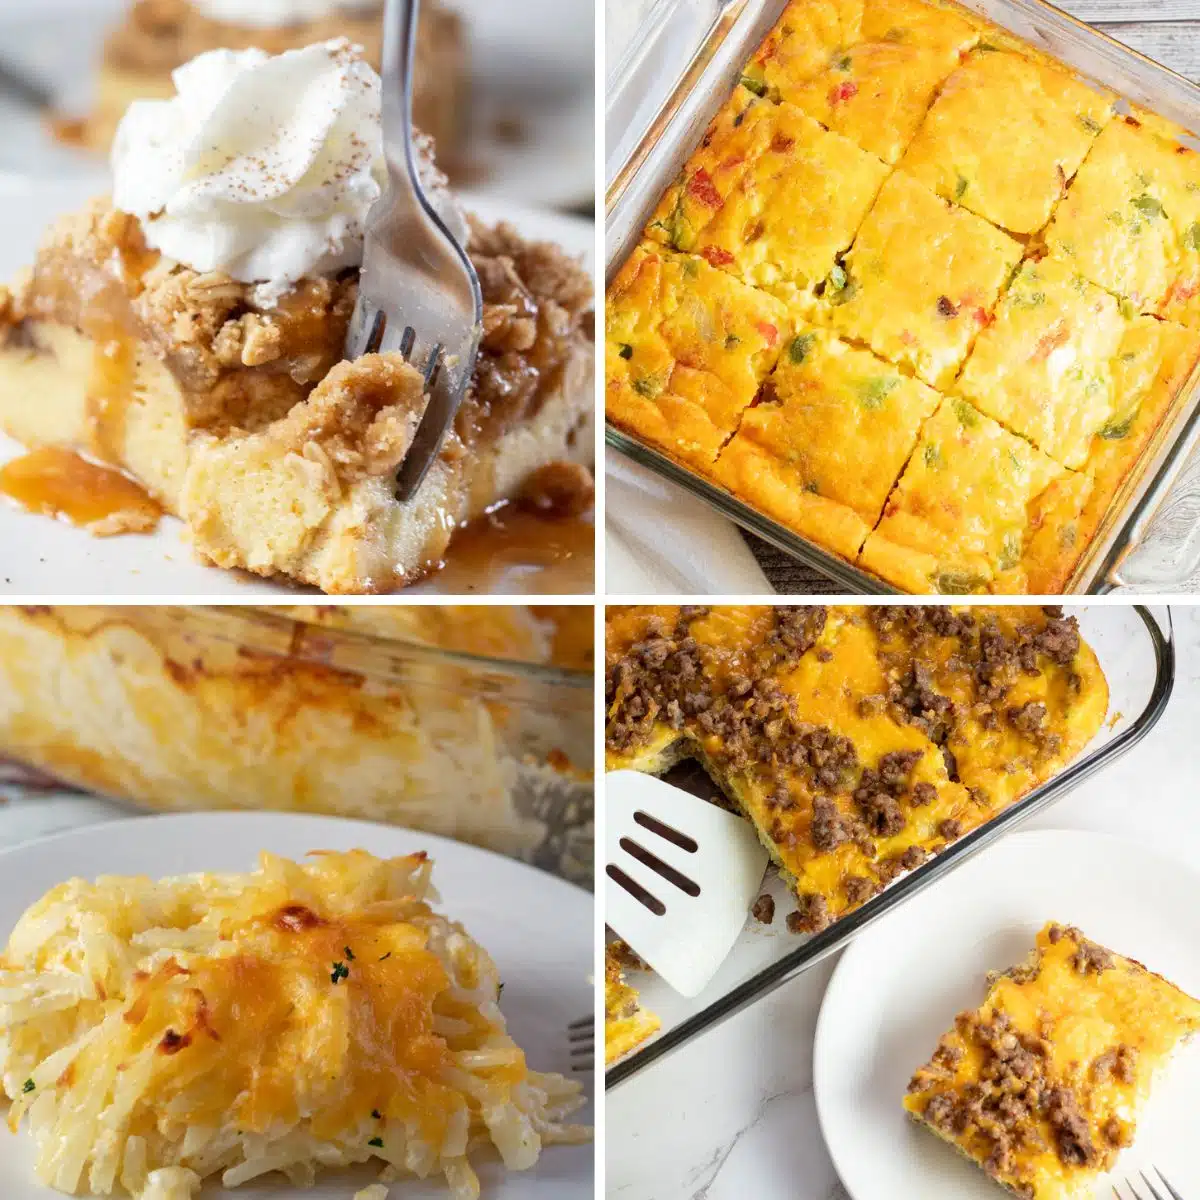 Best Christmas breakfast casserole recipes and ideas to feed a crowd over the holidays.